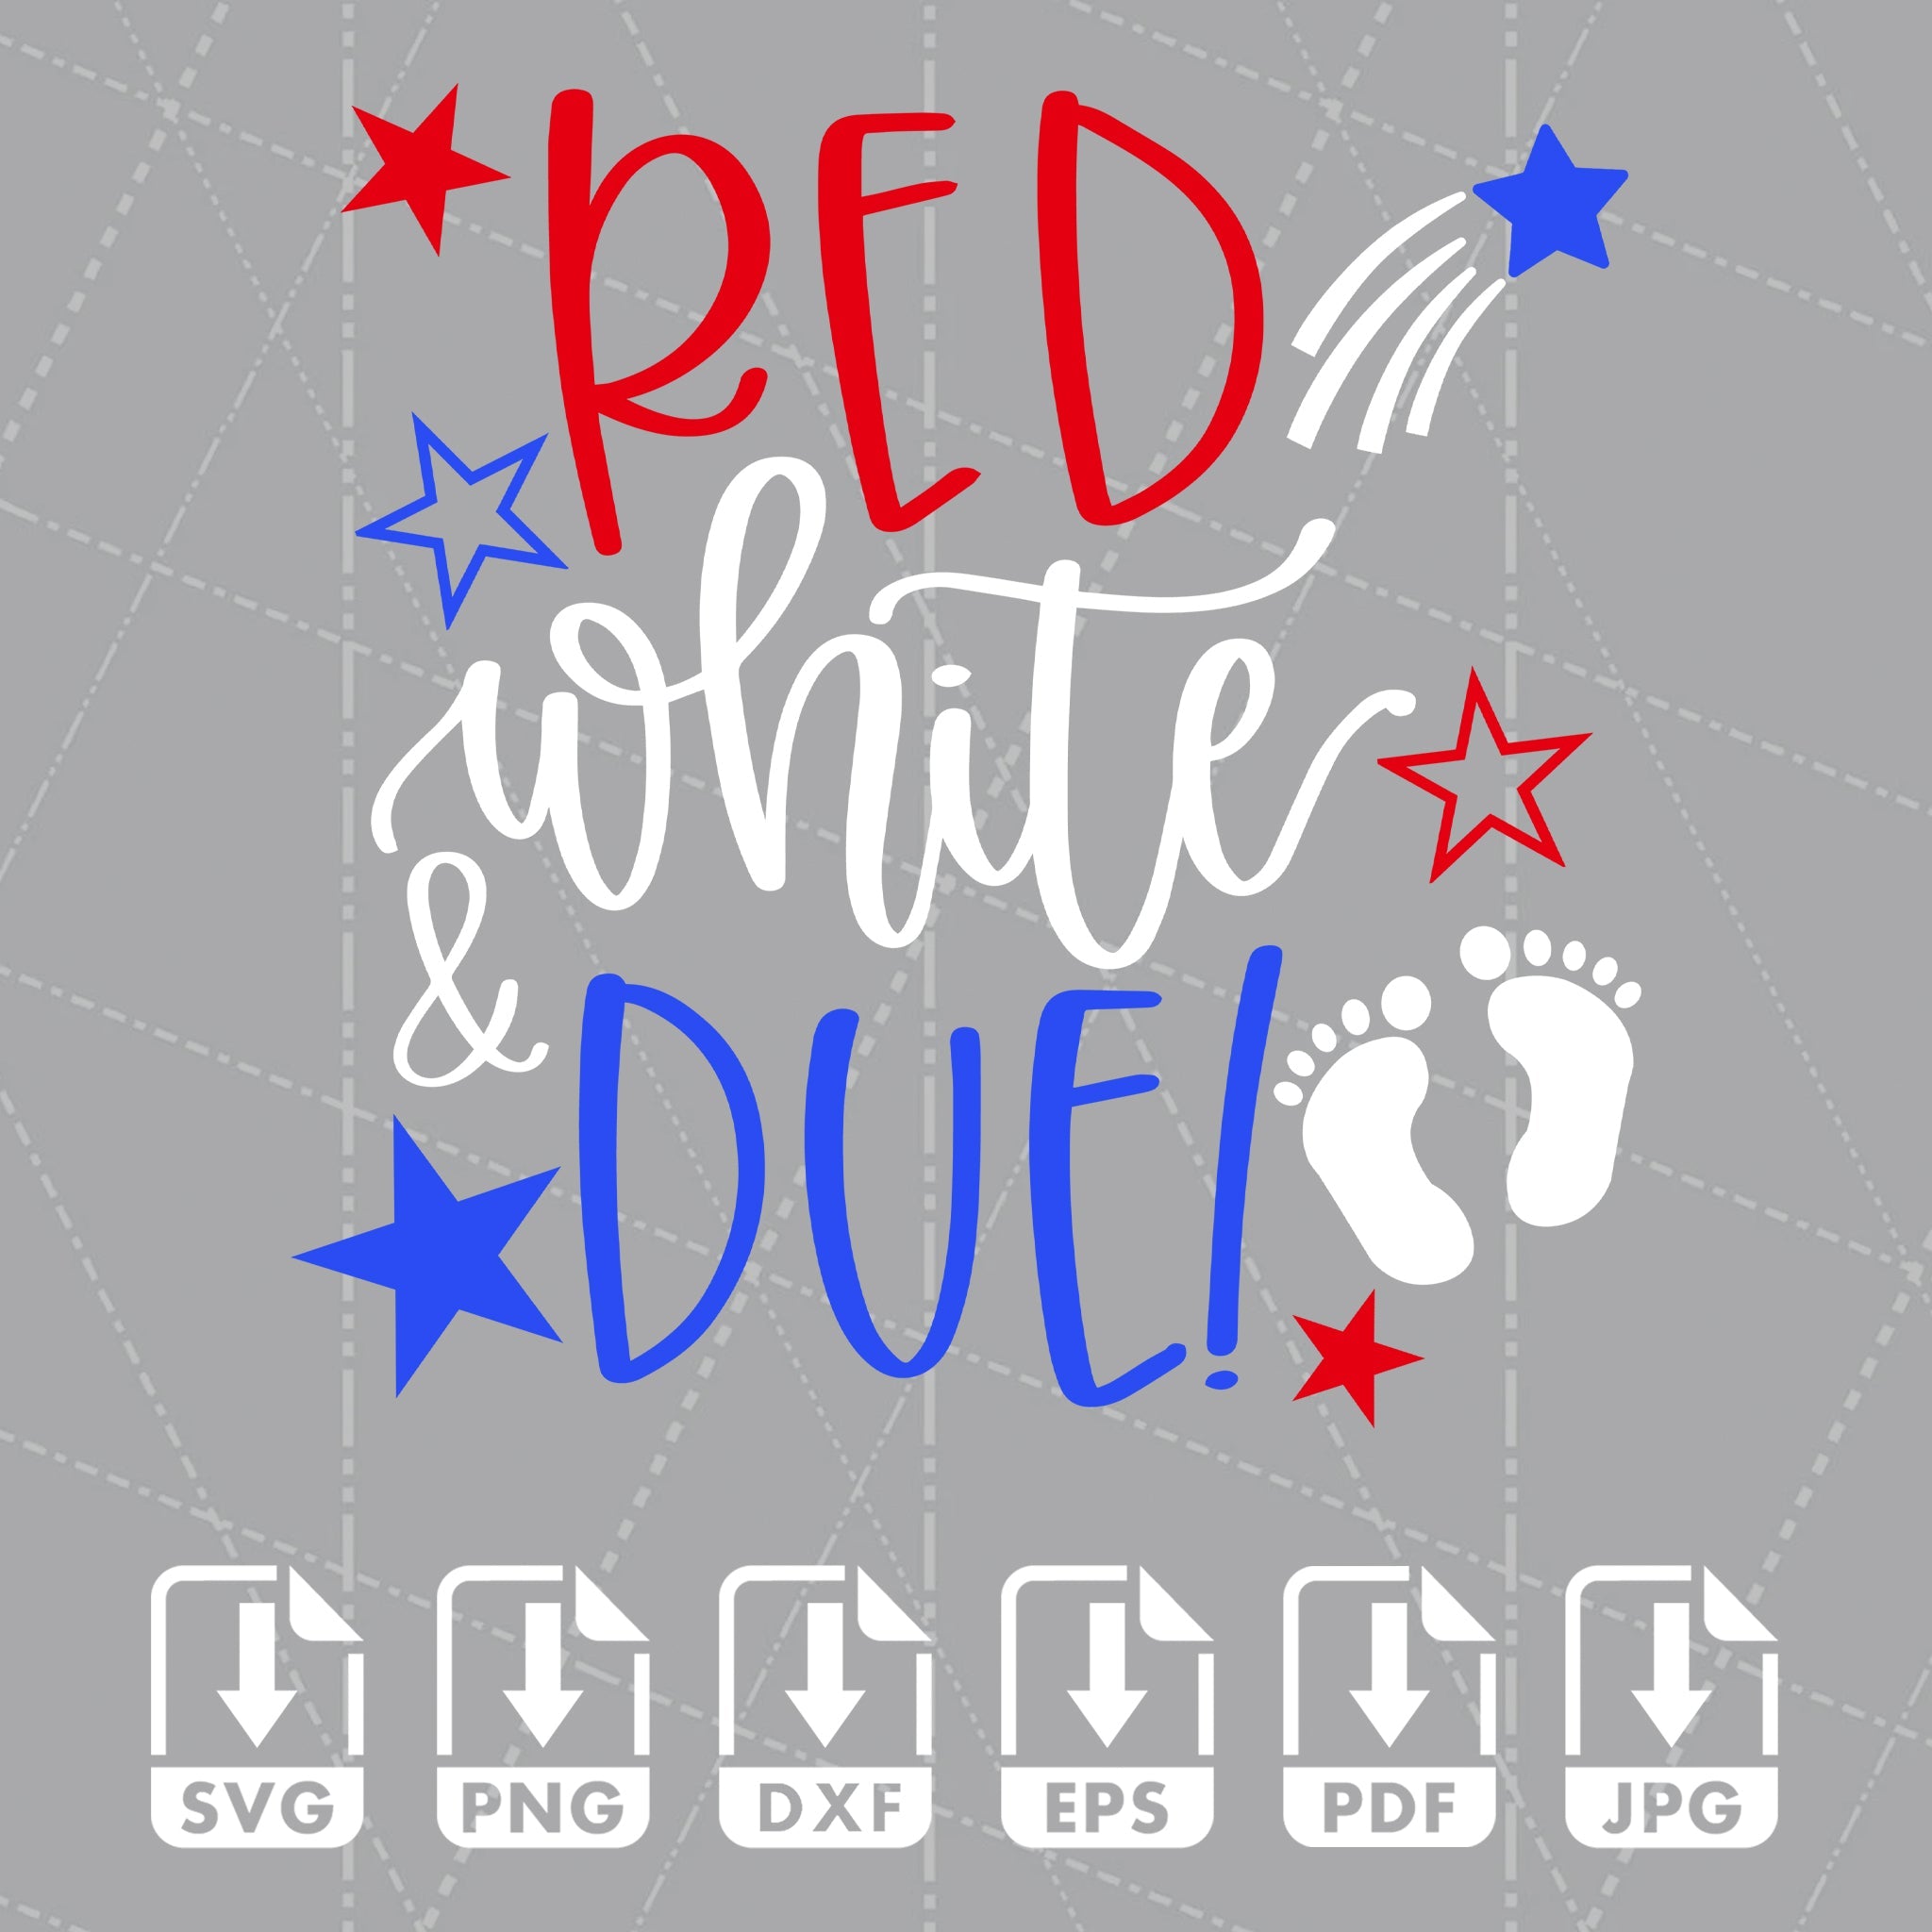 Red White and Due